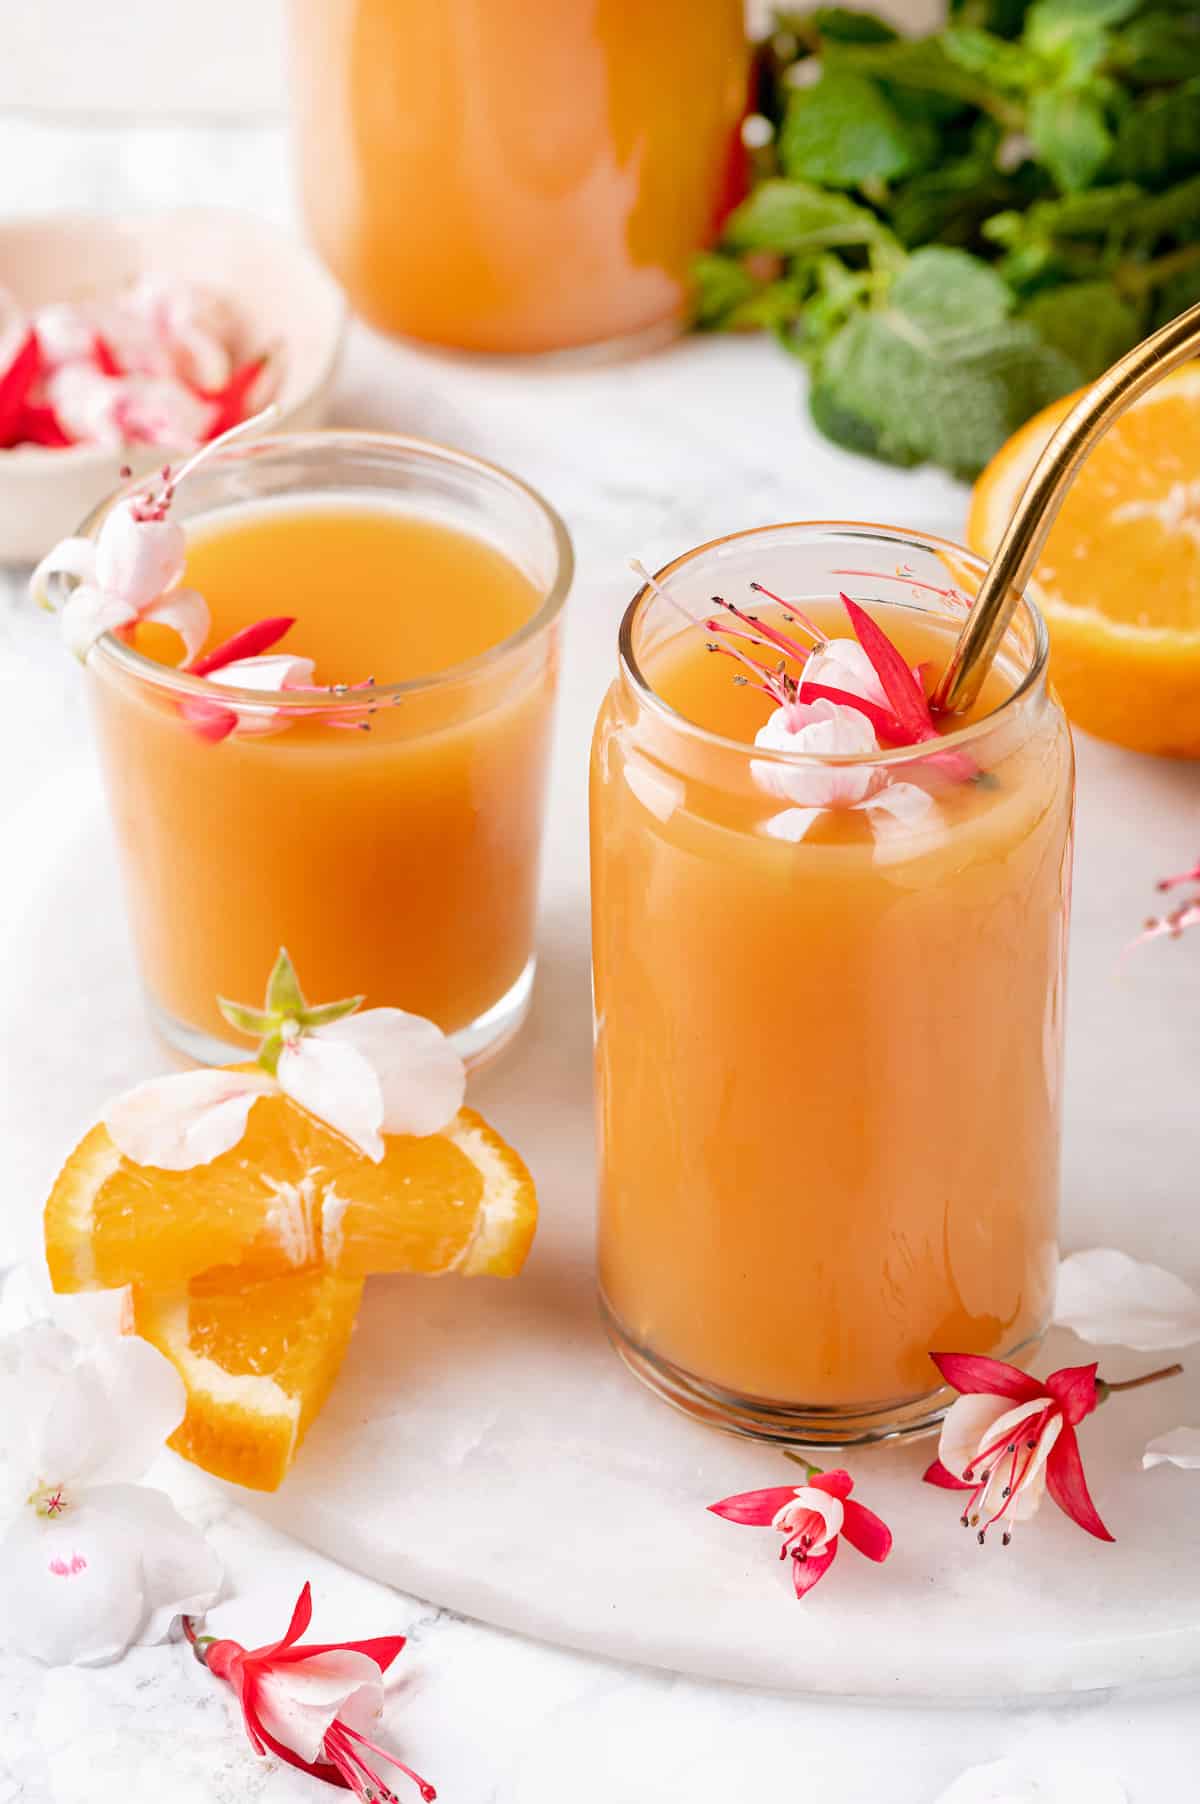 Two glasses of POG juice, one with a straw, and tropical flowers for garnish